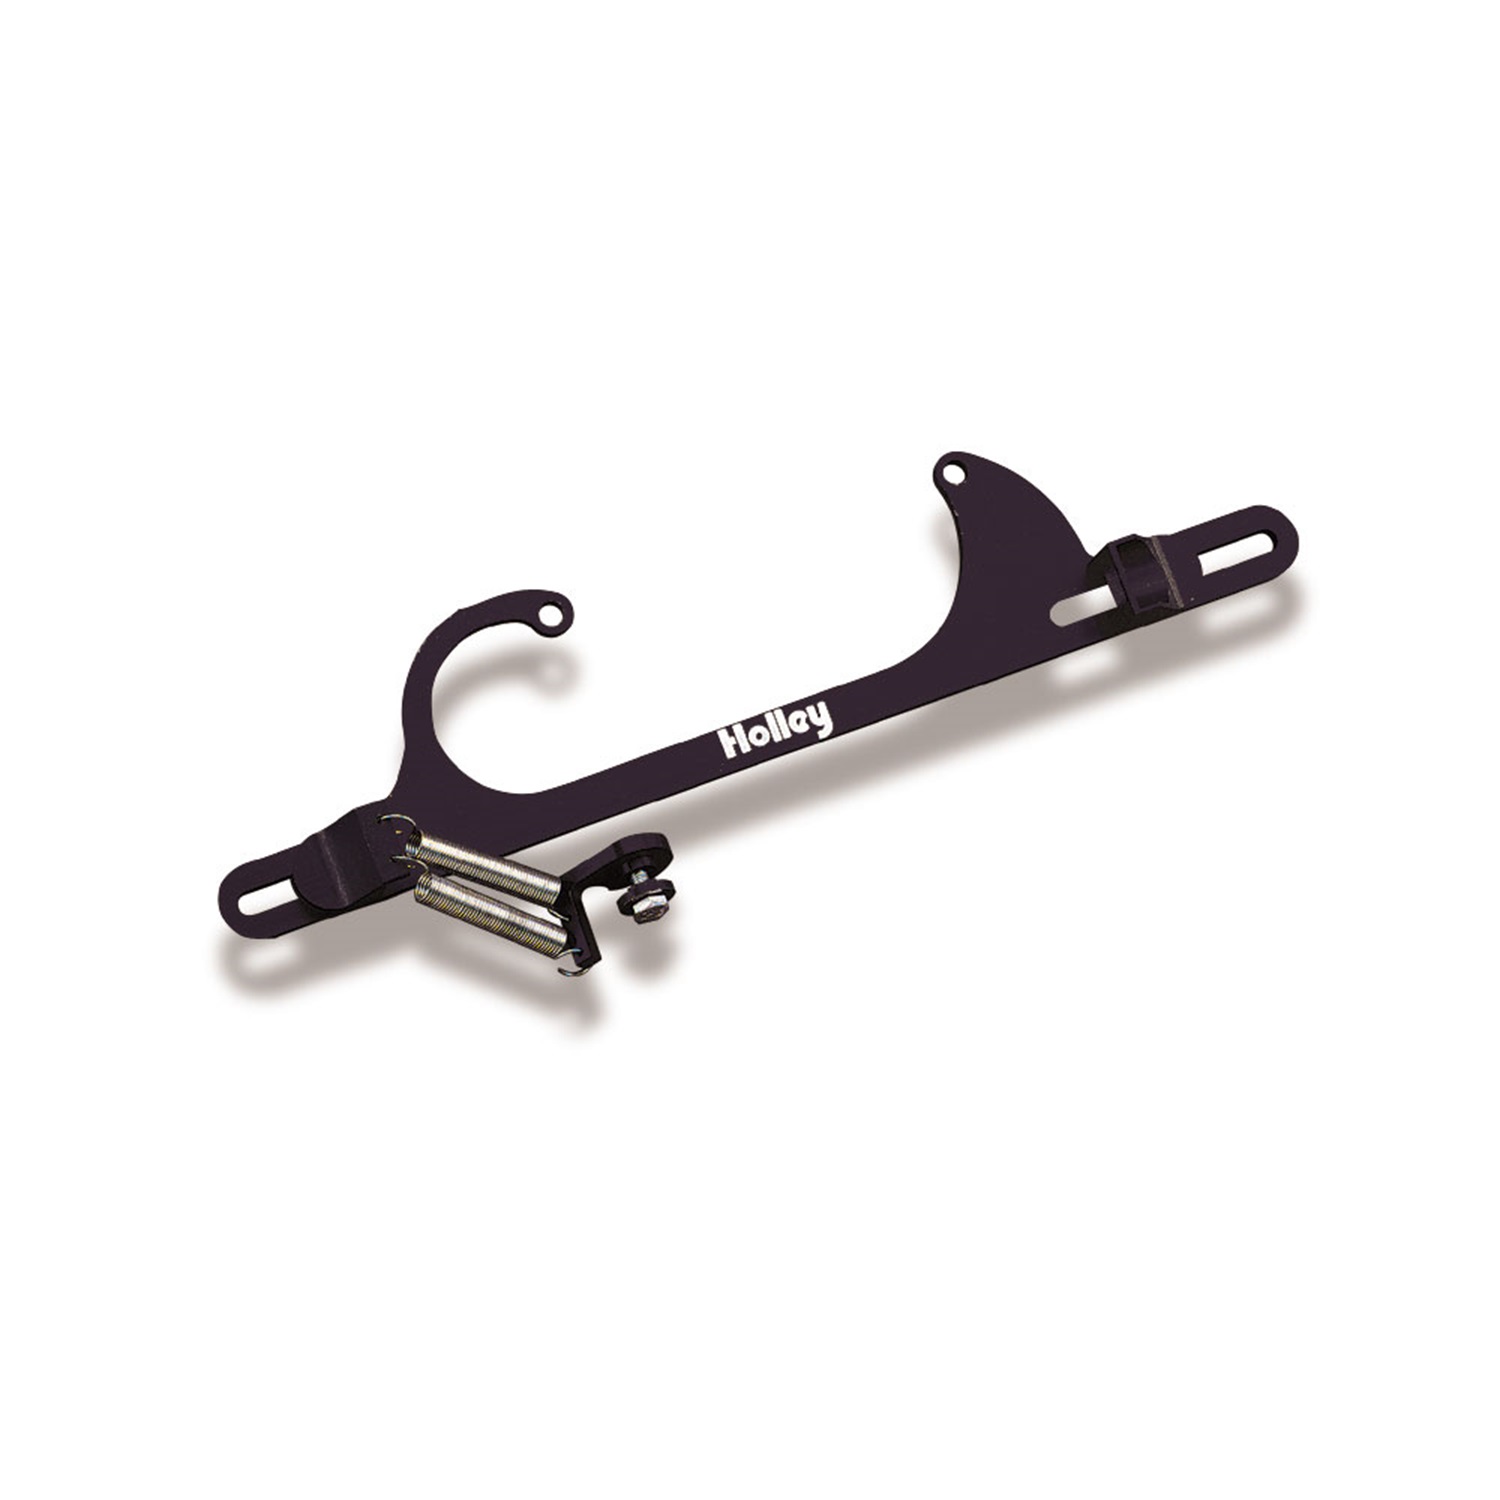 Holley Performance Holley Performance 20-112 Billet Aluminum Throttle Cable Bracket